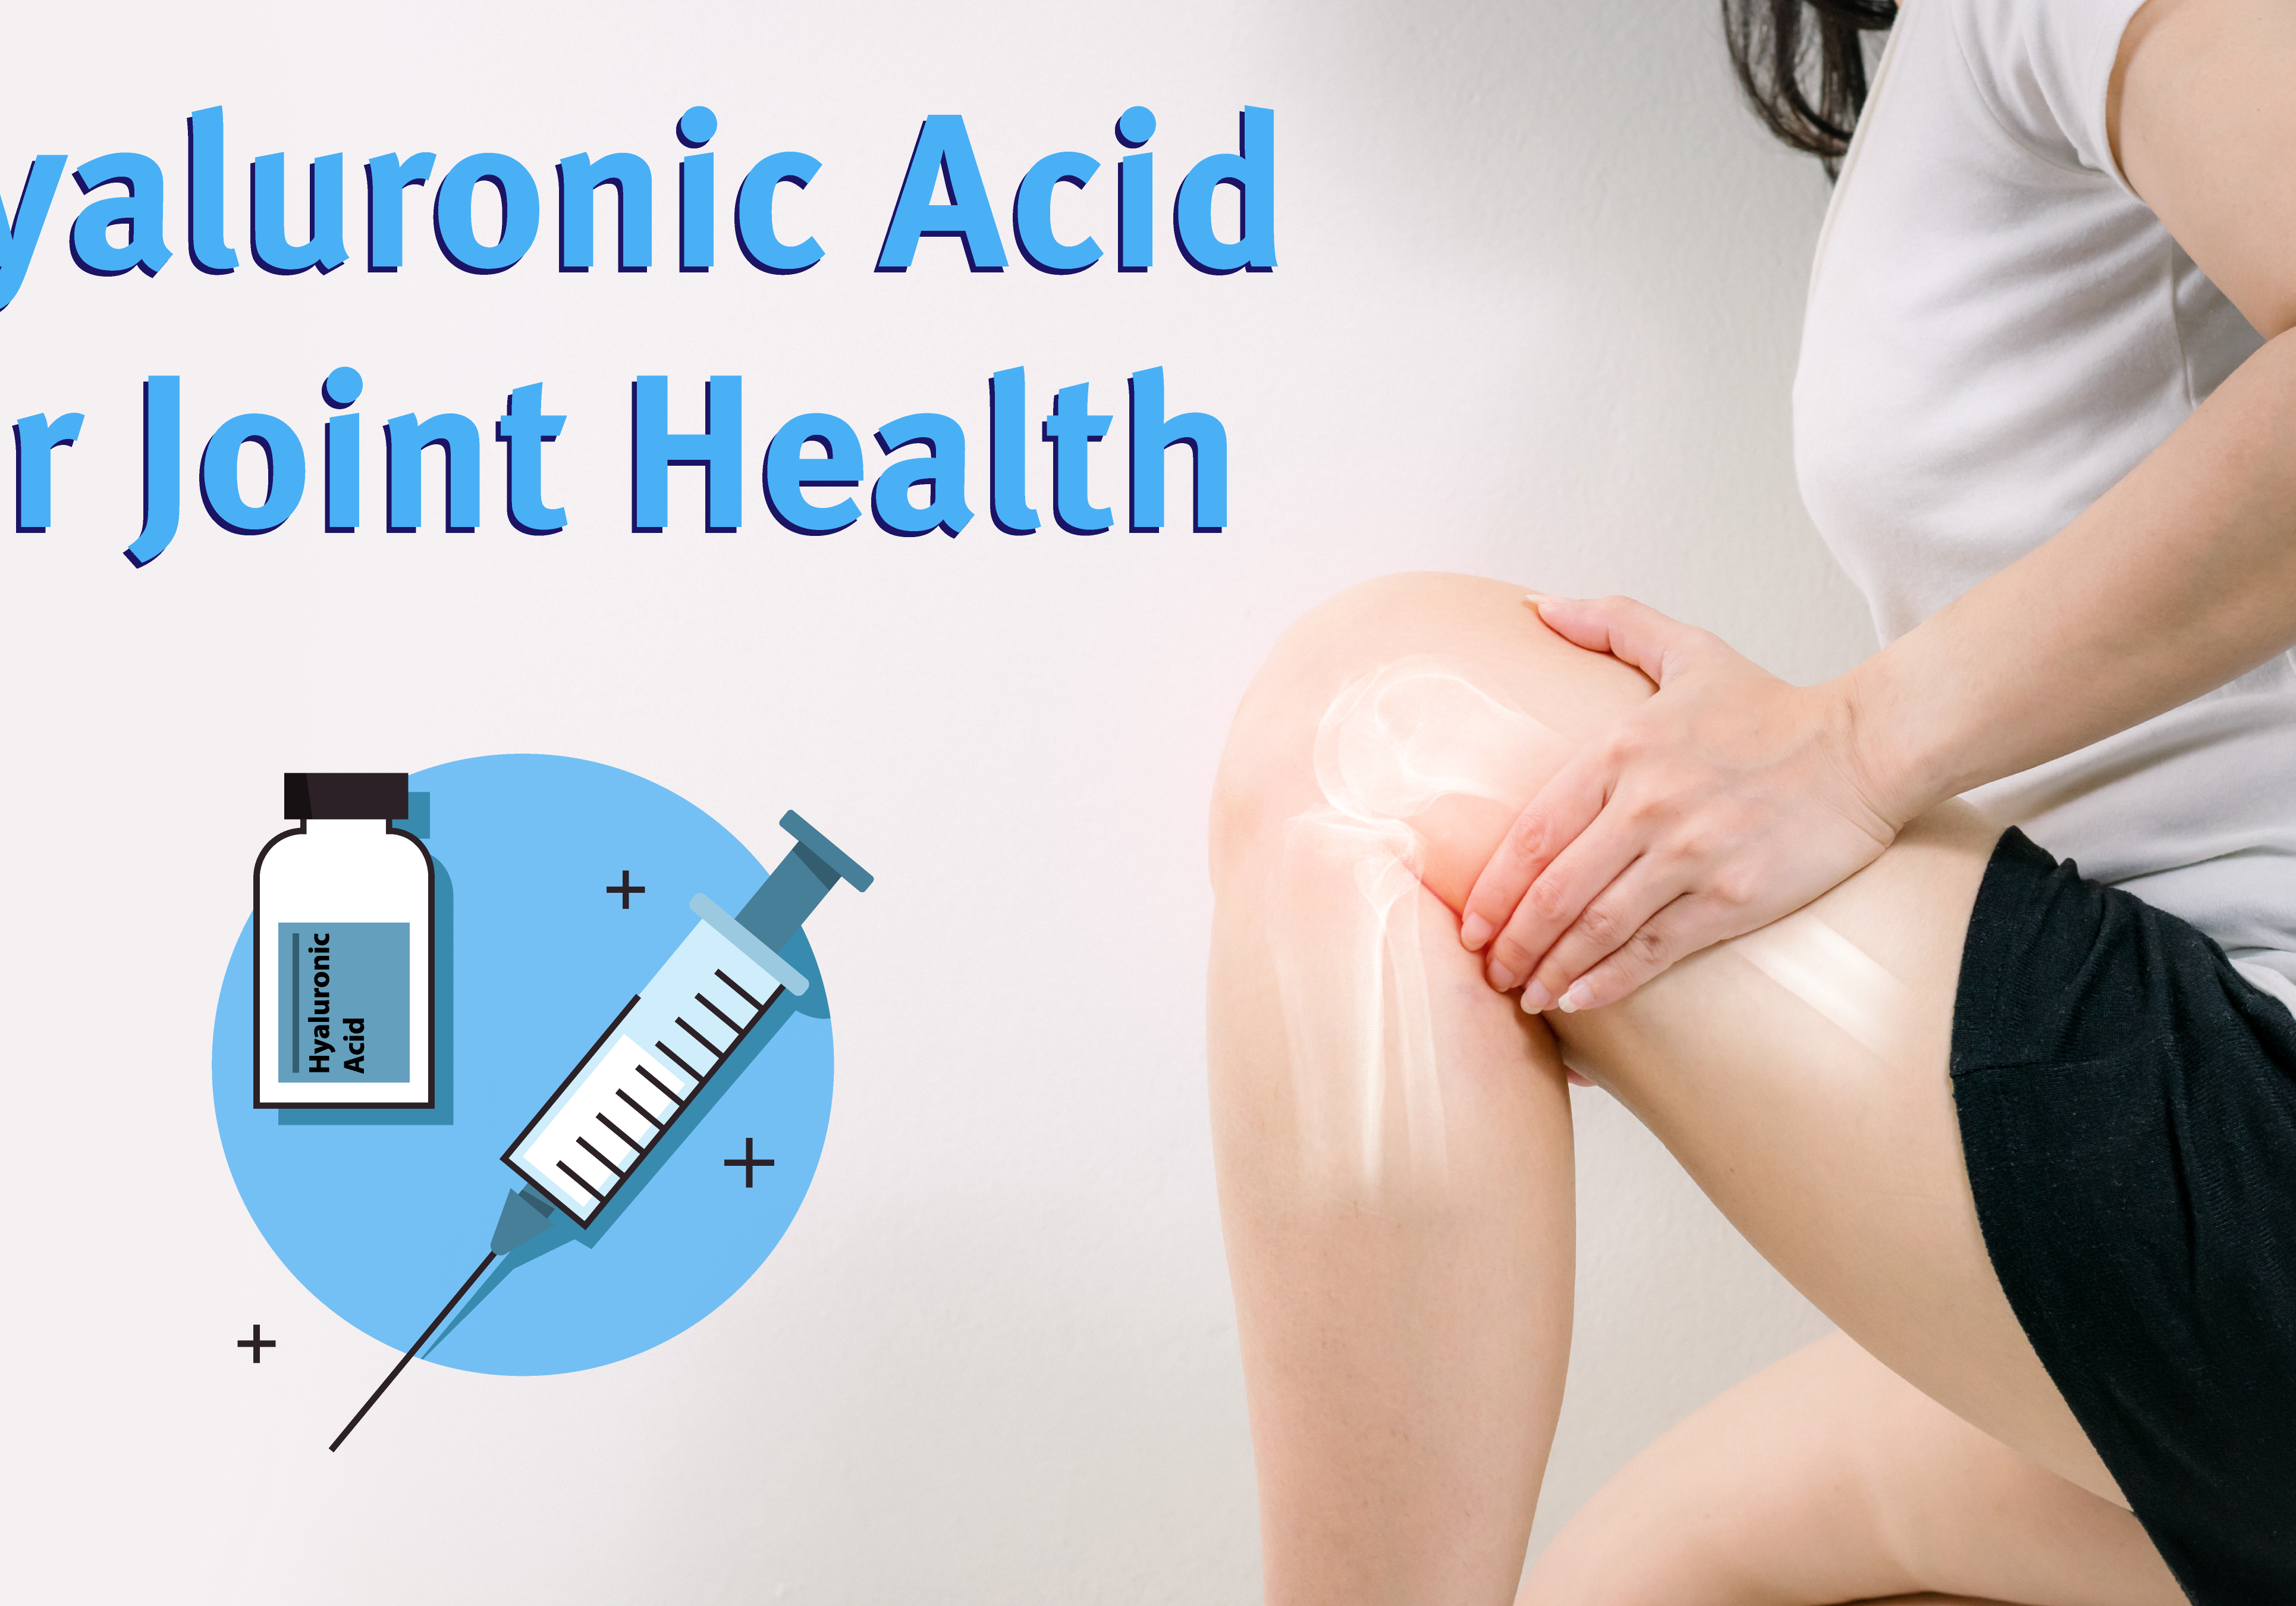 Hyaluronic Acid for Joint health. image of person holding painful knee joint with illustrations of HA and syringe